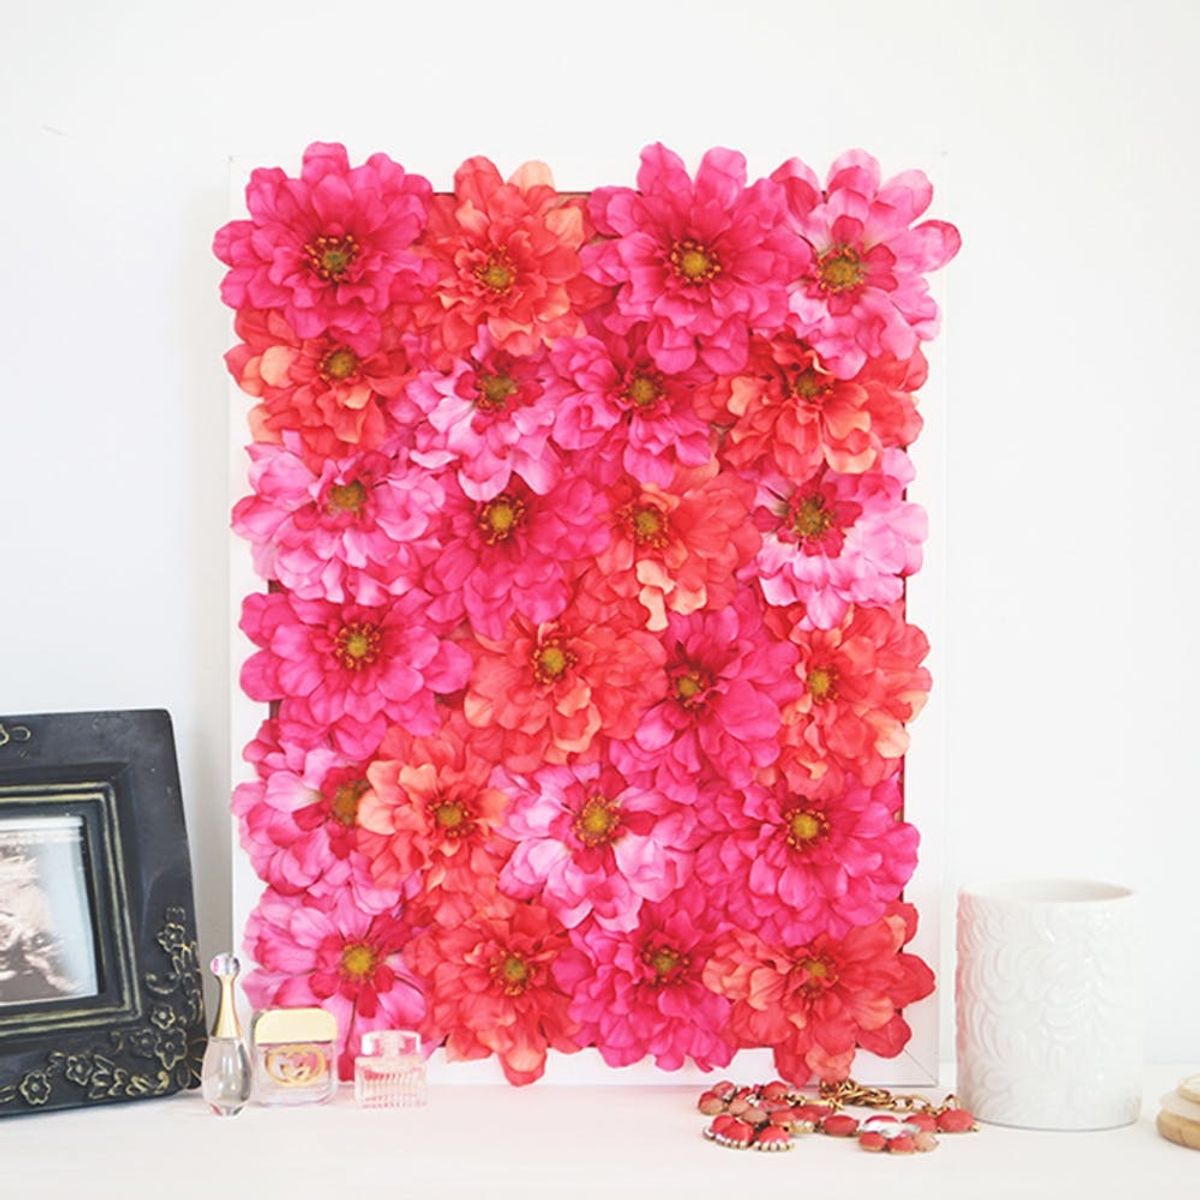 Make This Dreamy Floral Artwork in Minutes